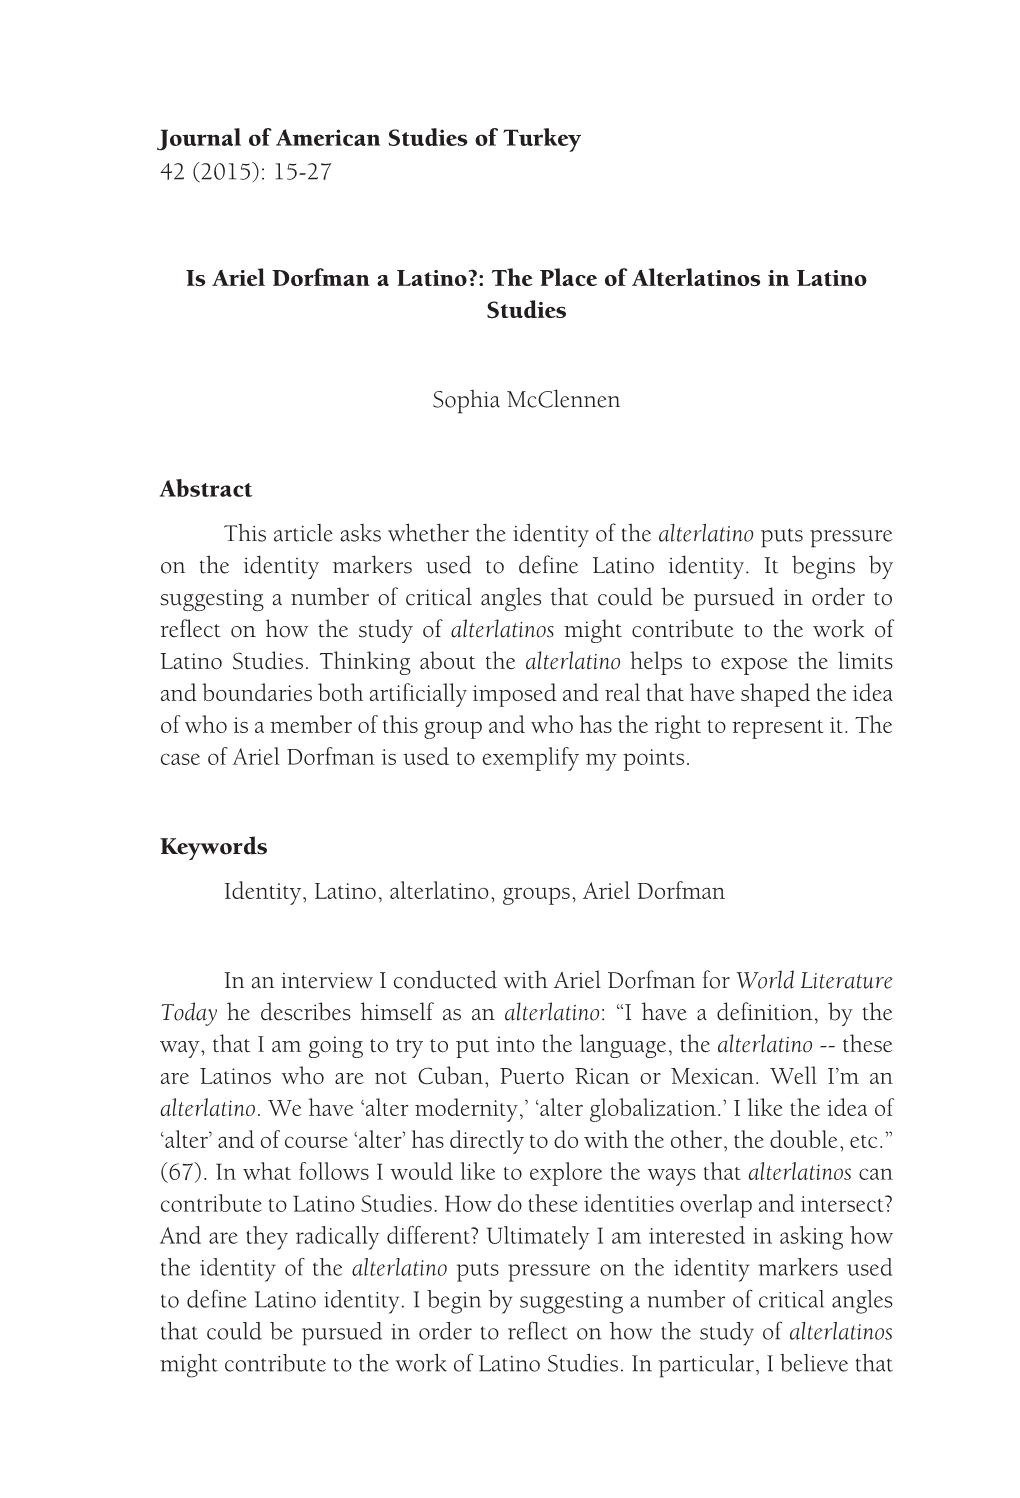 Is Ariel Dorfman a Latino?: the Place of Alterlatinos in Latino Studies